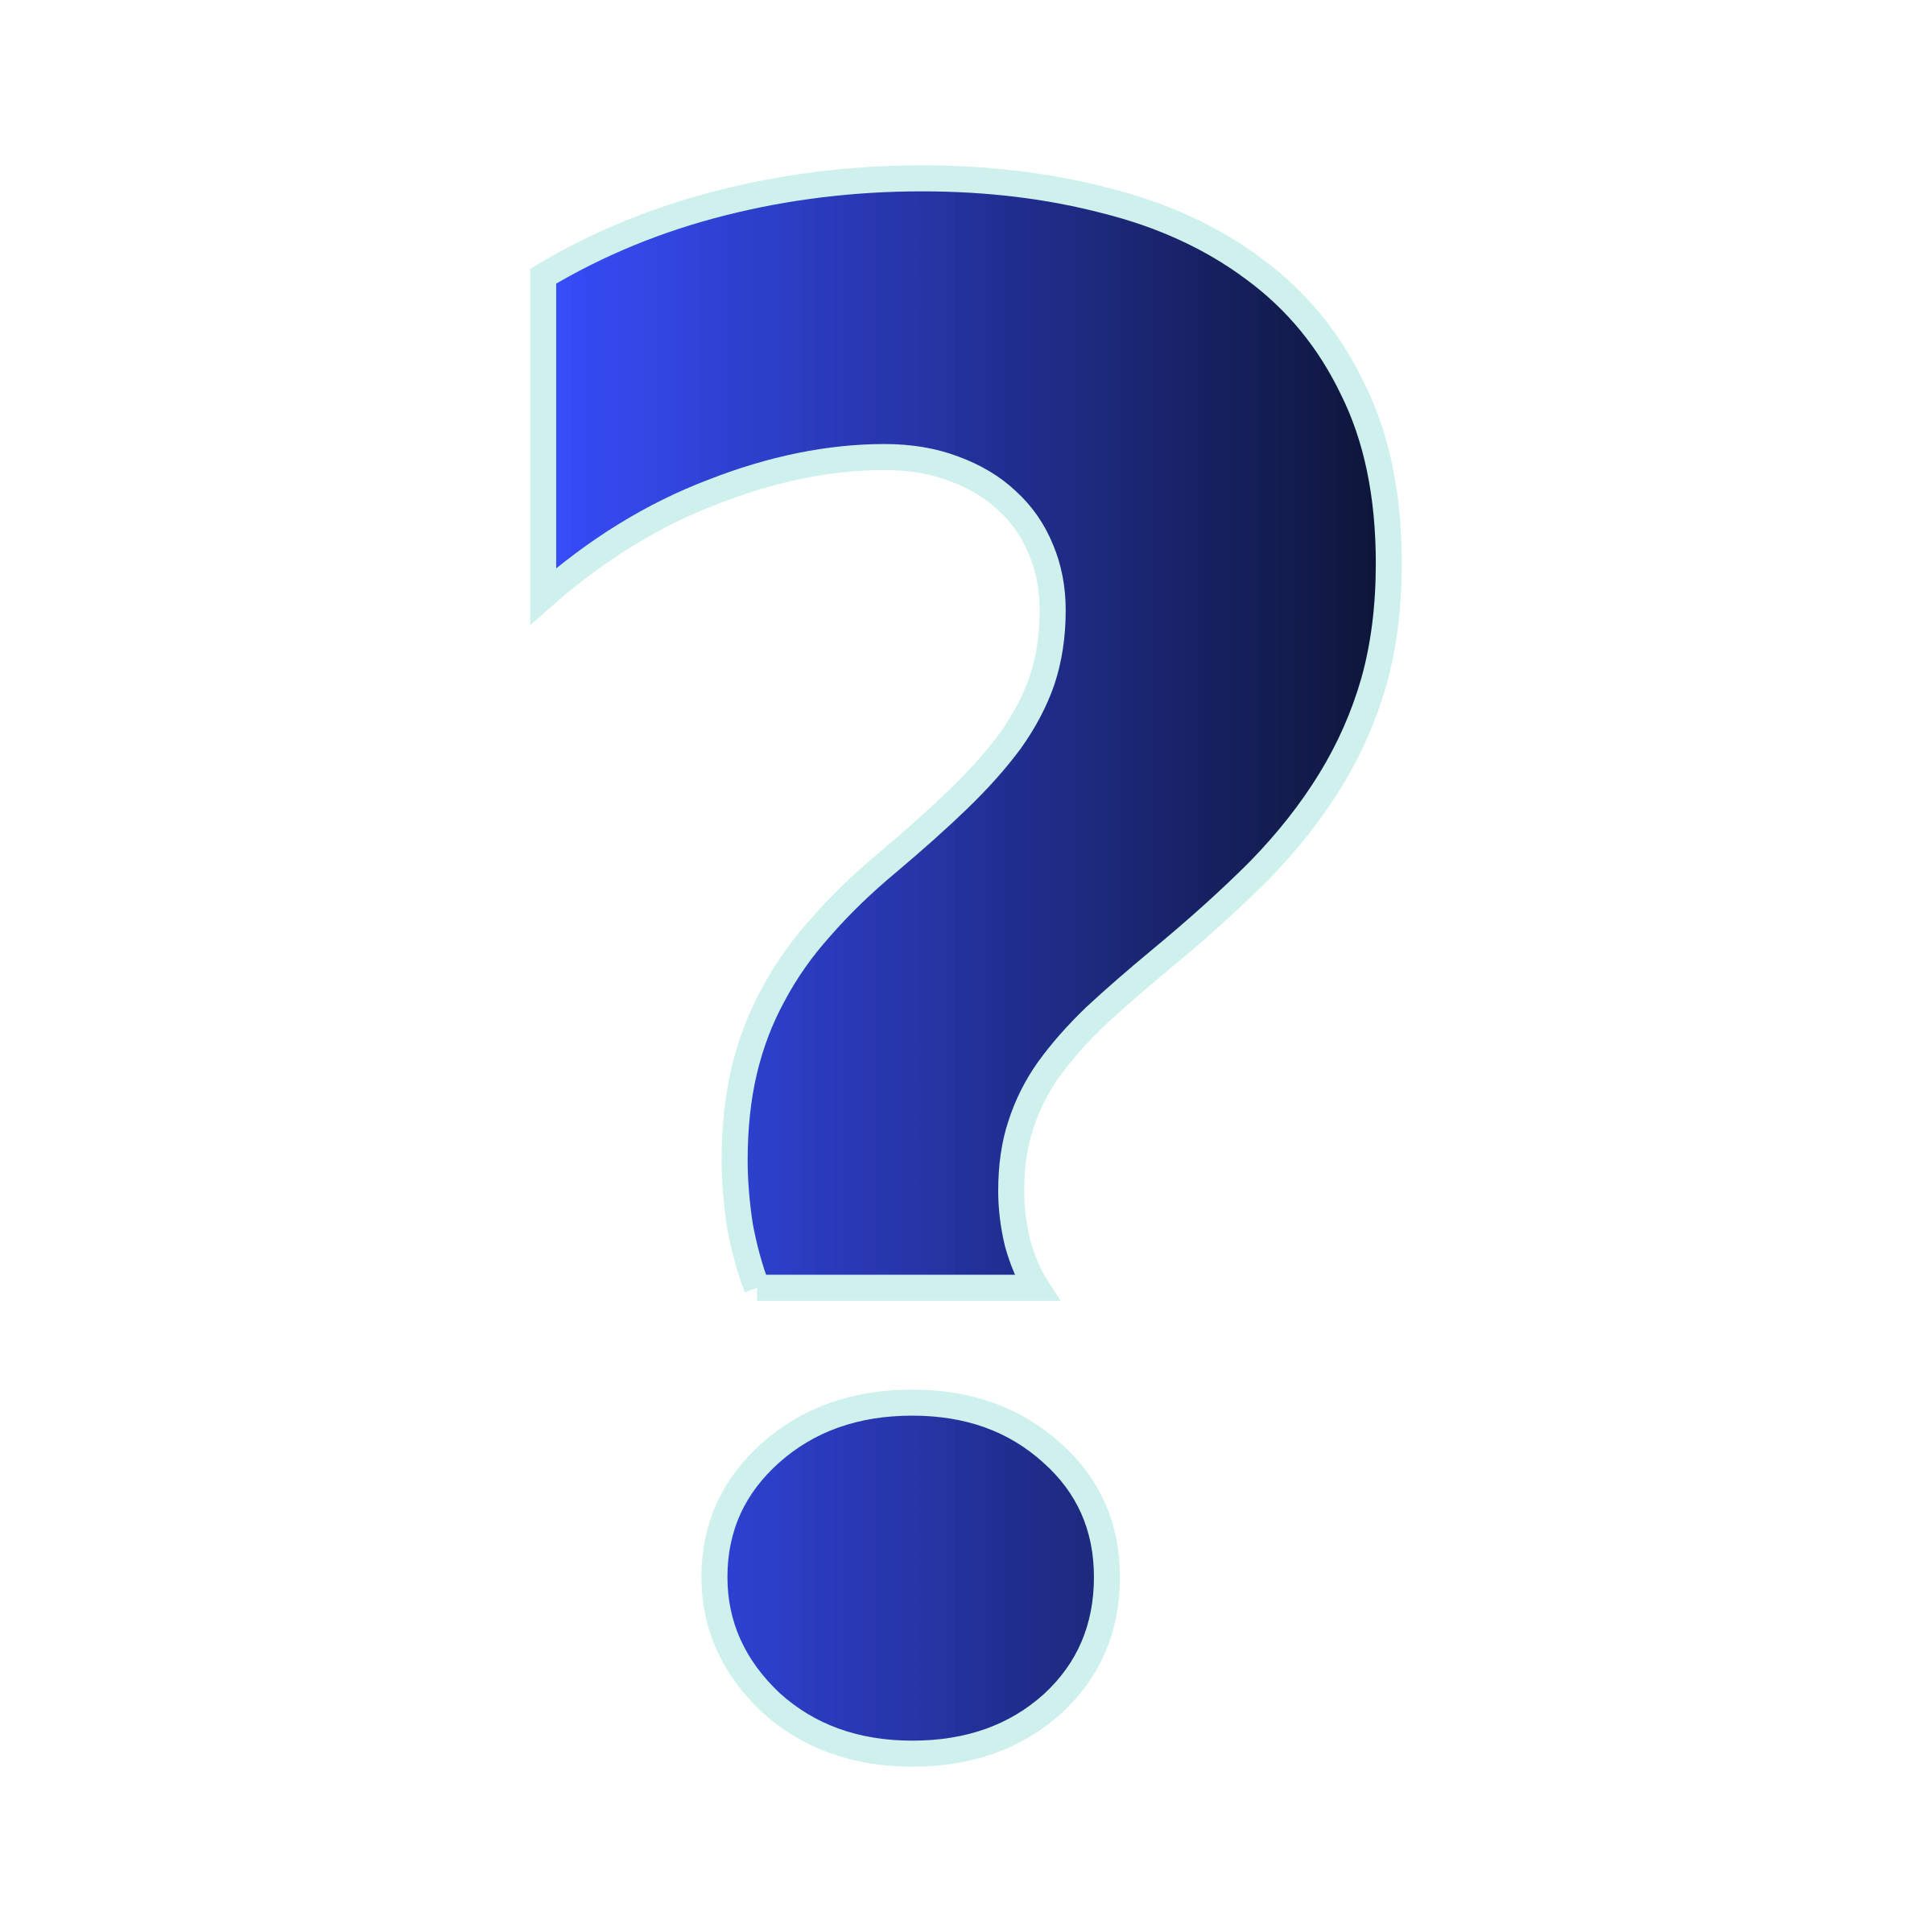 clipart image of question mark - photo #9